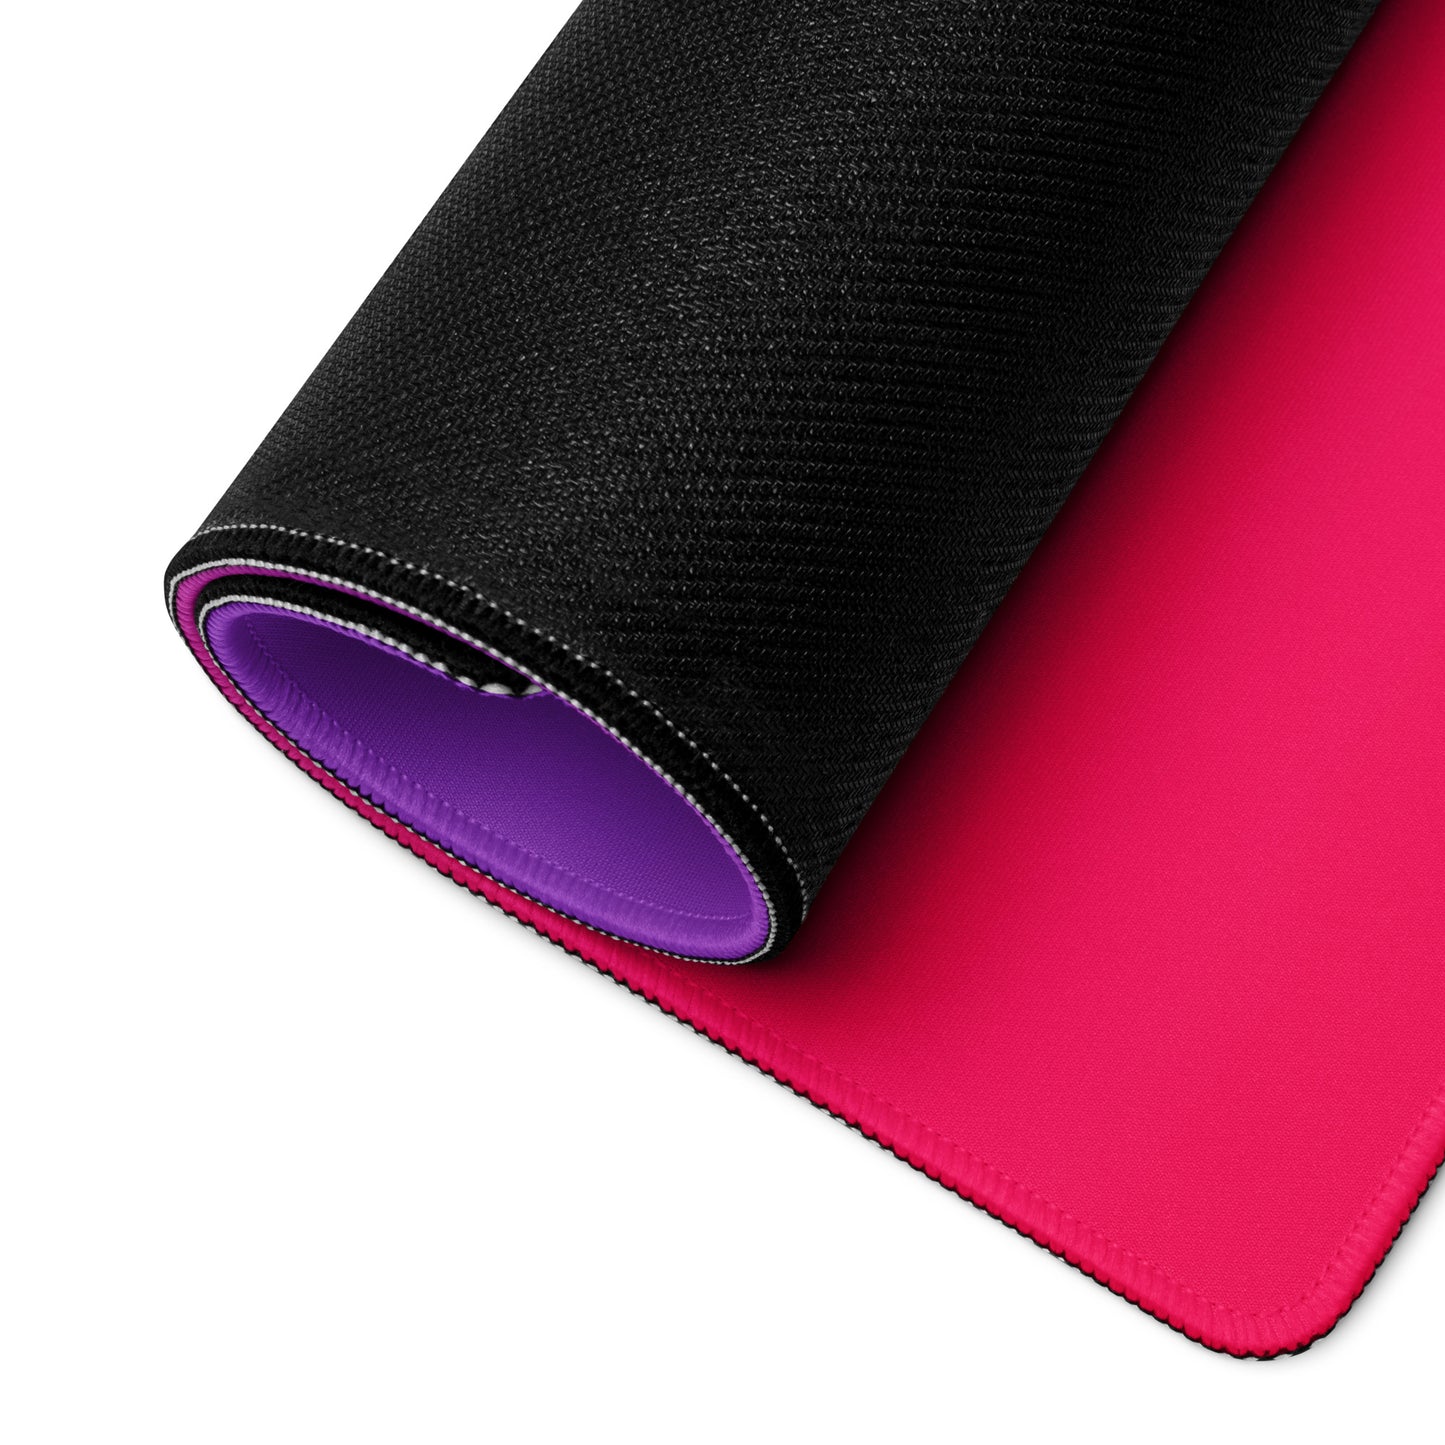 A 36" x 18" desk pad with a brightly colored ice cream cone in the middle of it rolled up. Pink and purple in color.